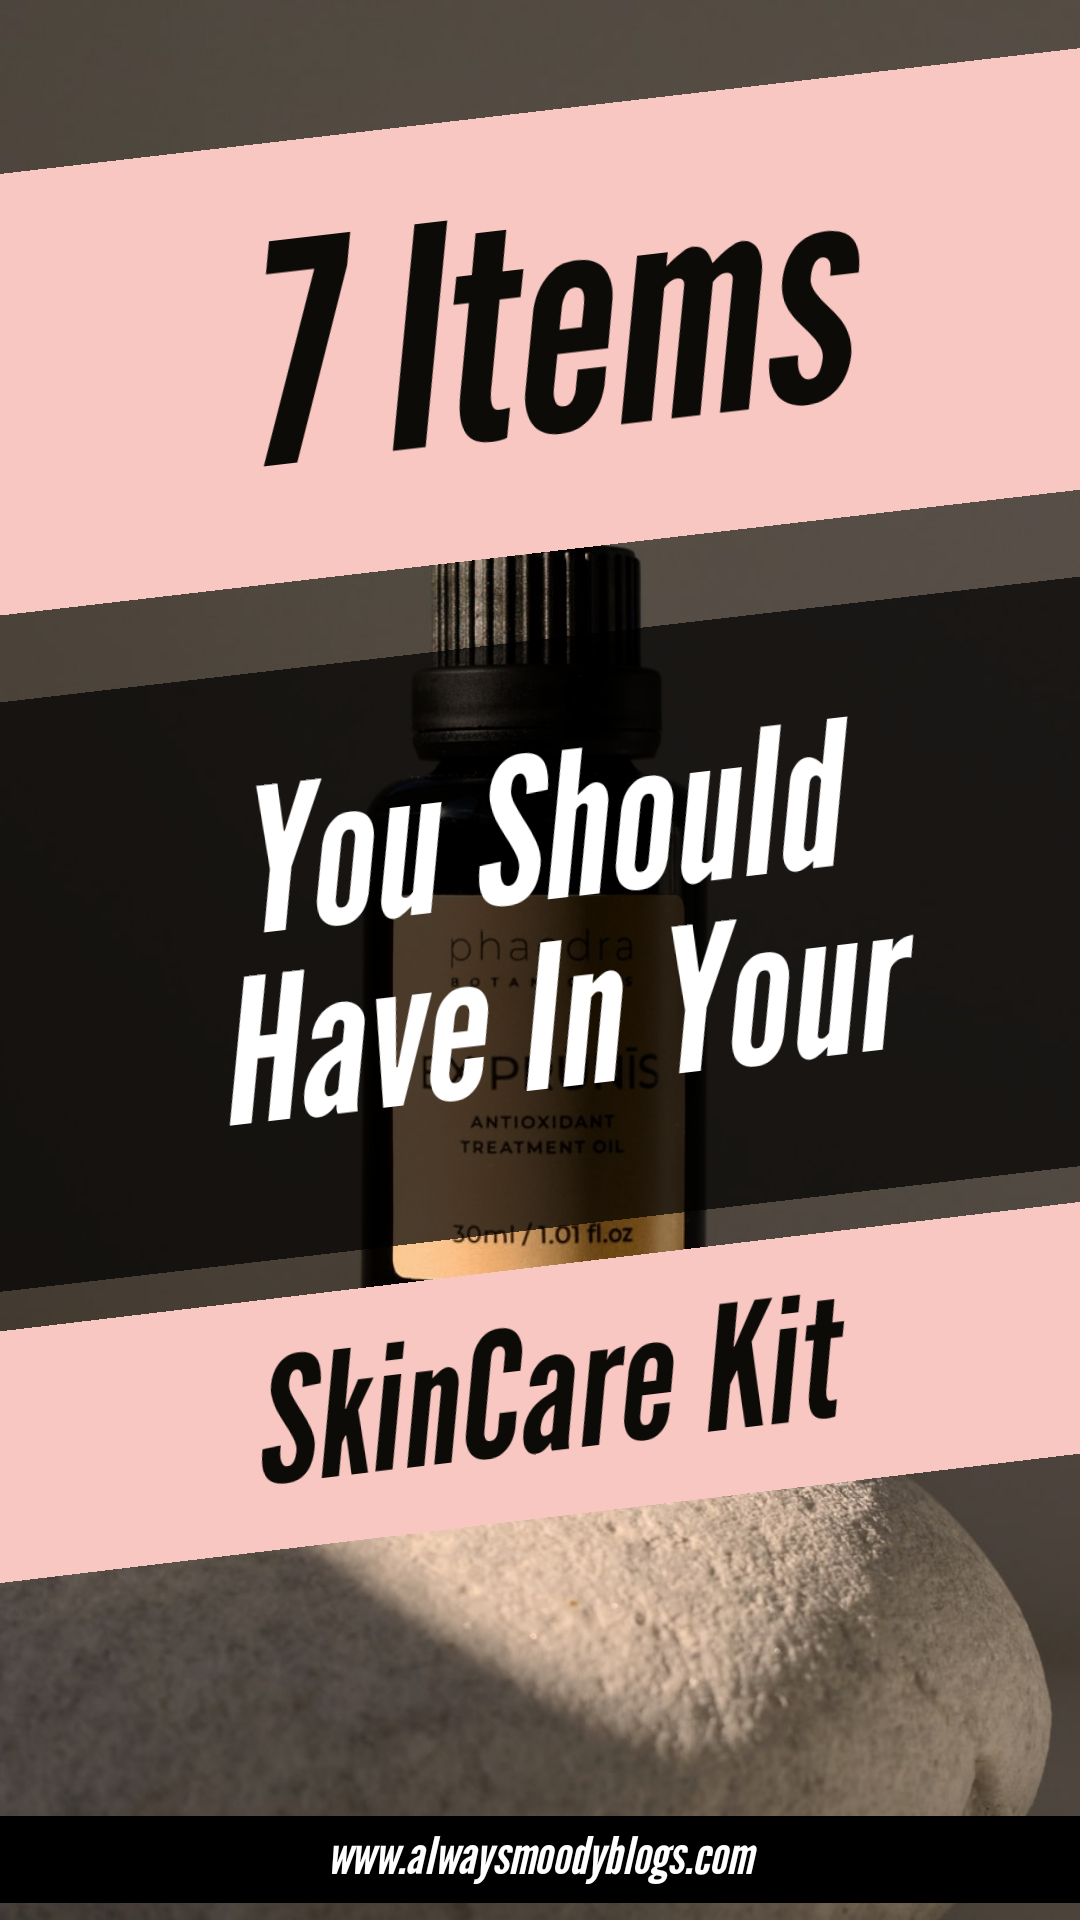 7 Items You Should Have In Your Skin Care Kit